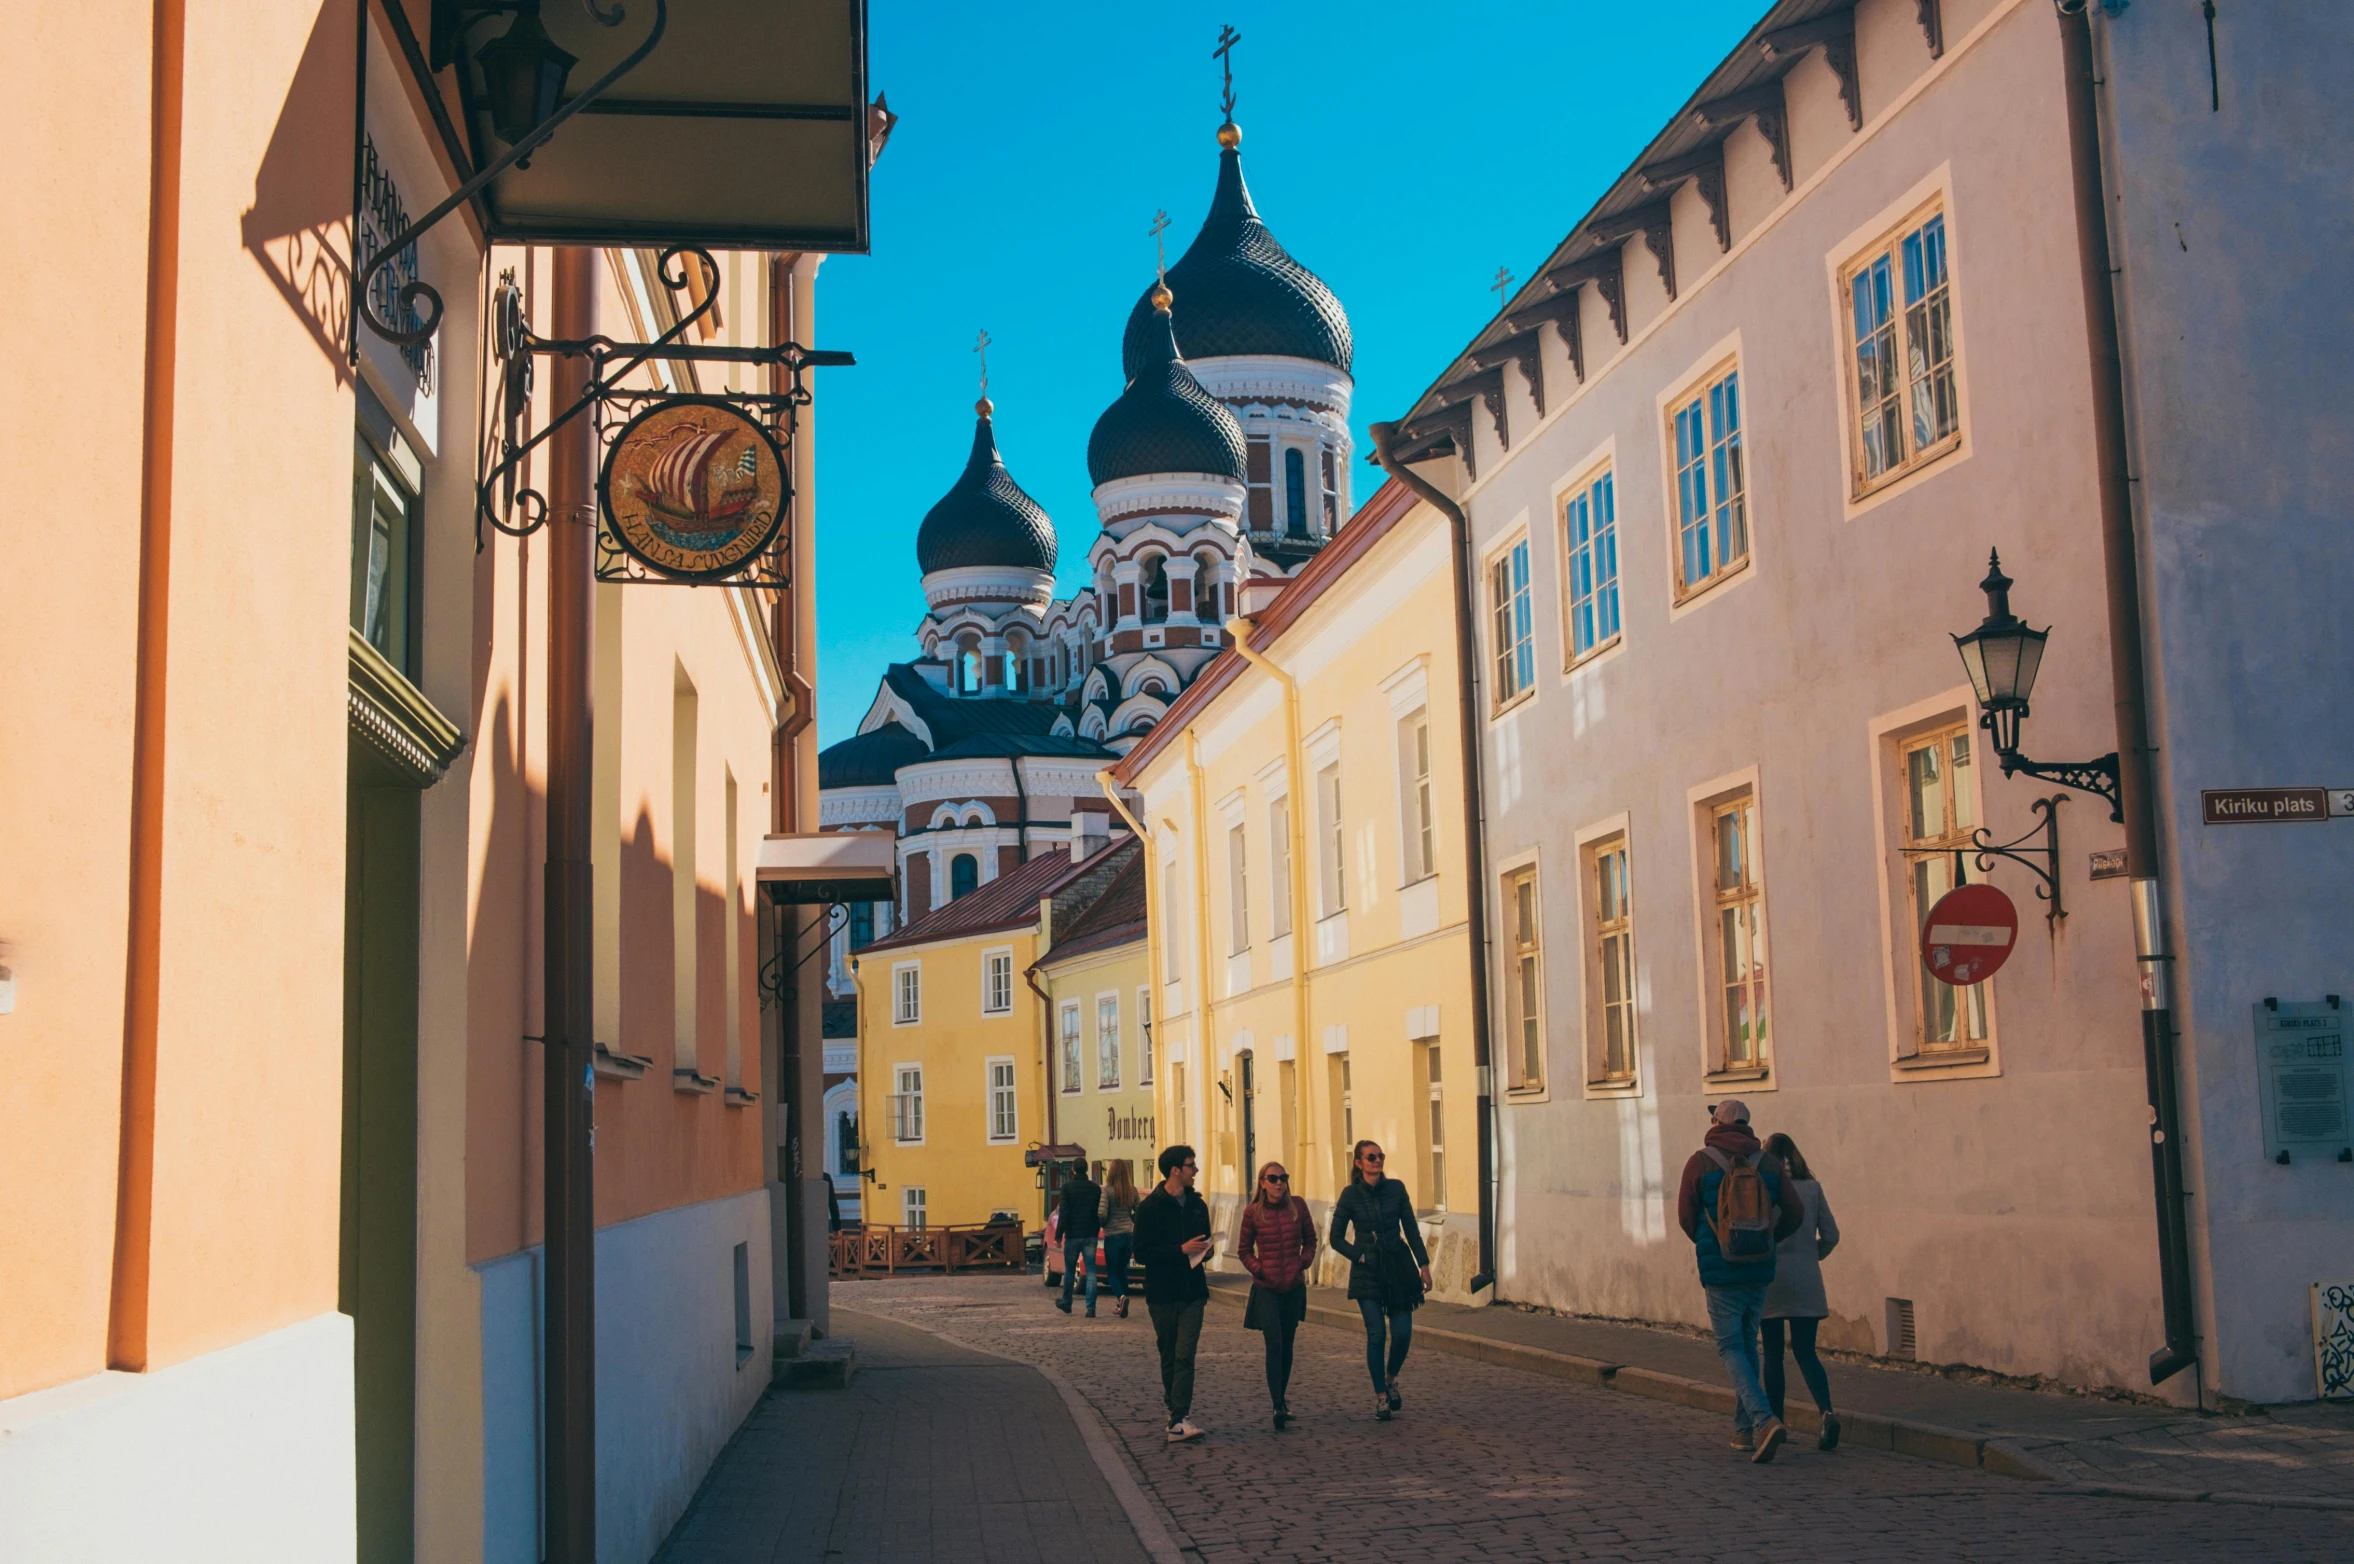 a group of people walking down a street, by Julia Pishtar, pexels contest winner, baroque, capital of estonia, domes, colorful scene, high quality upload